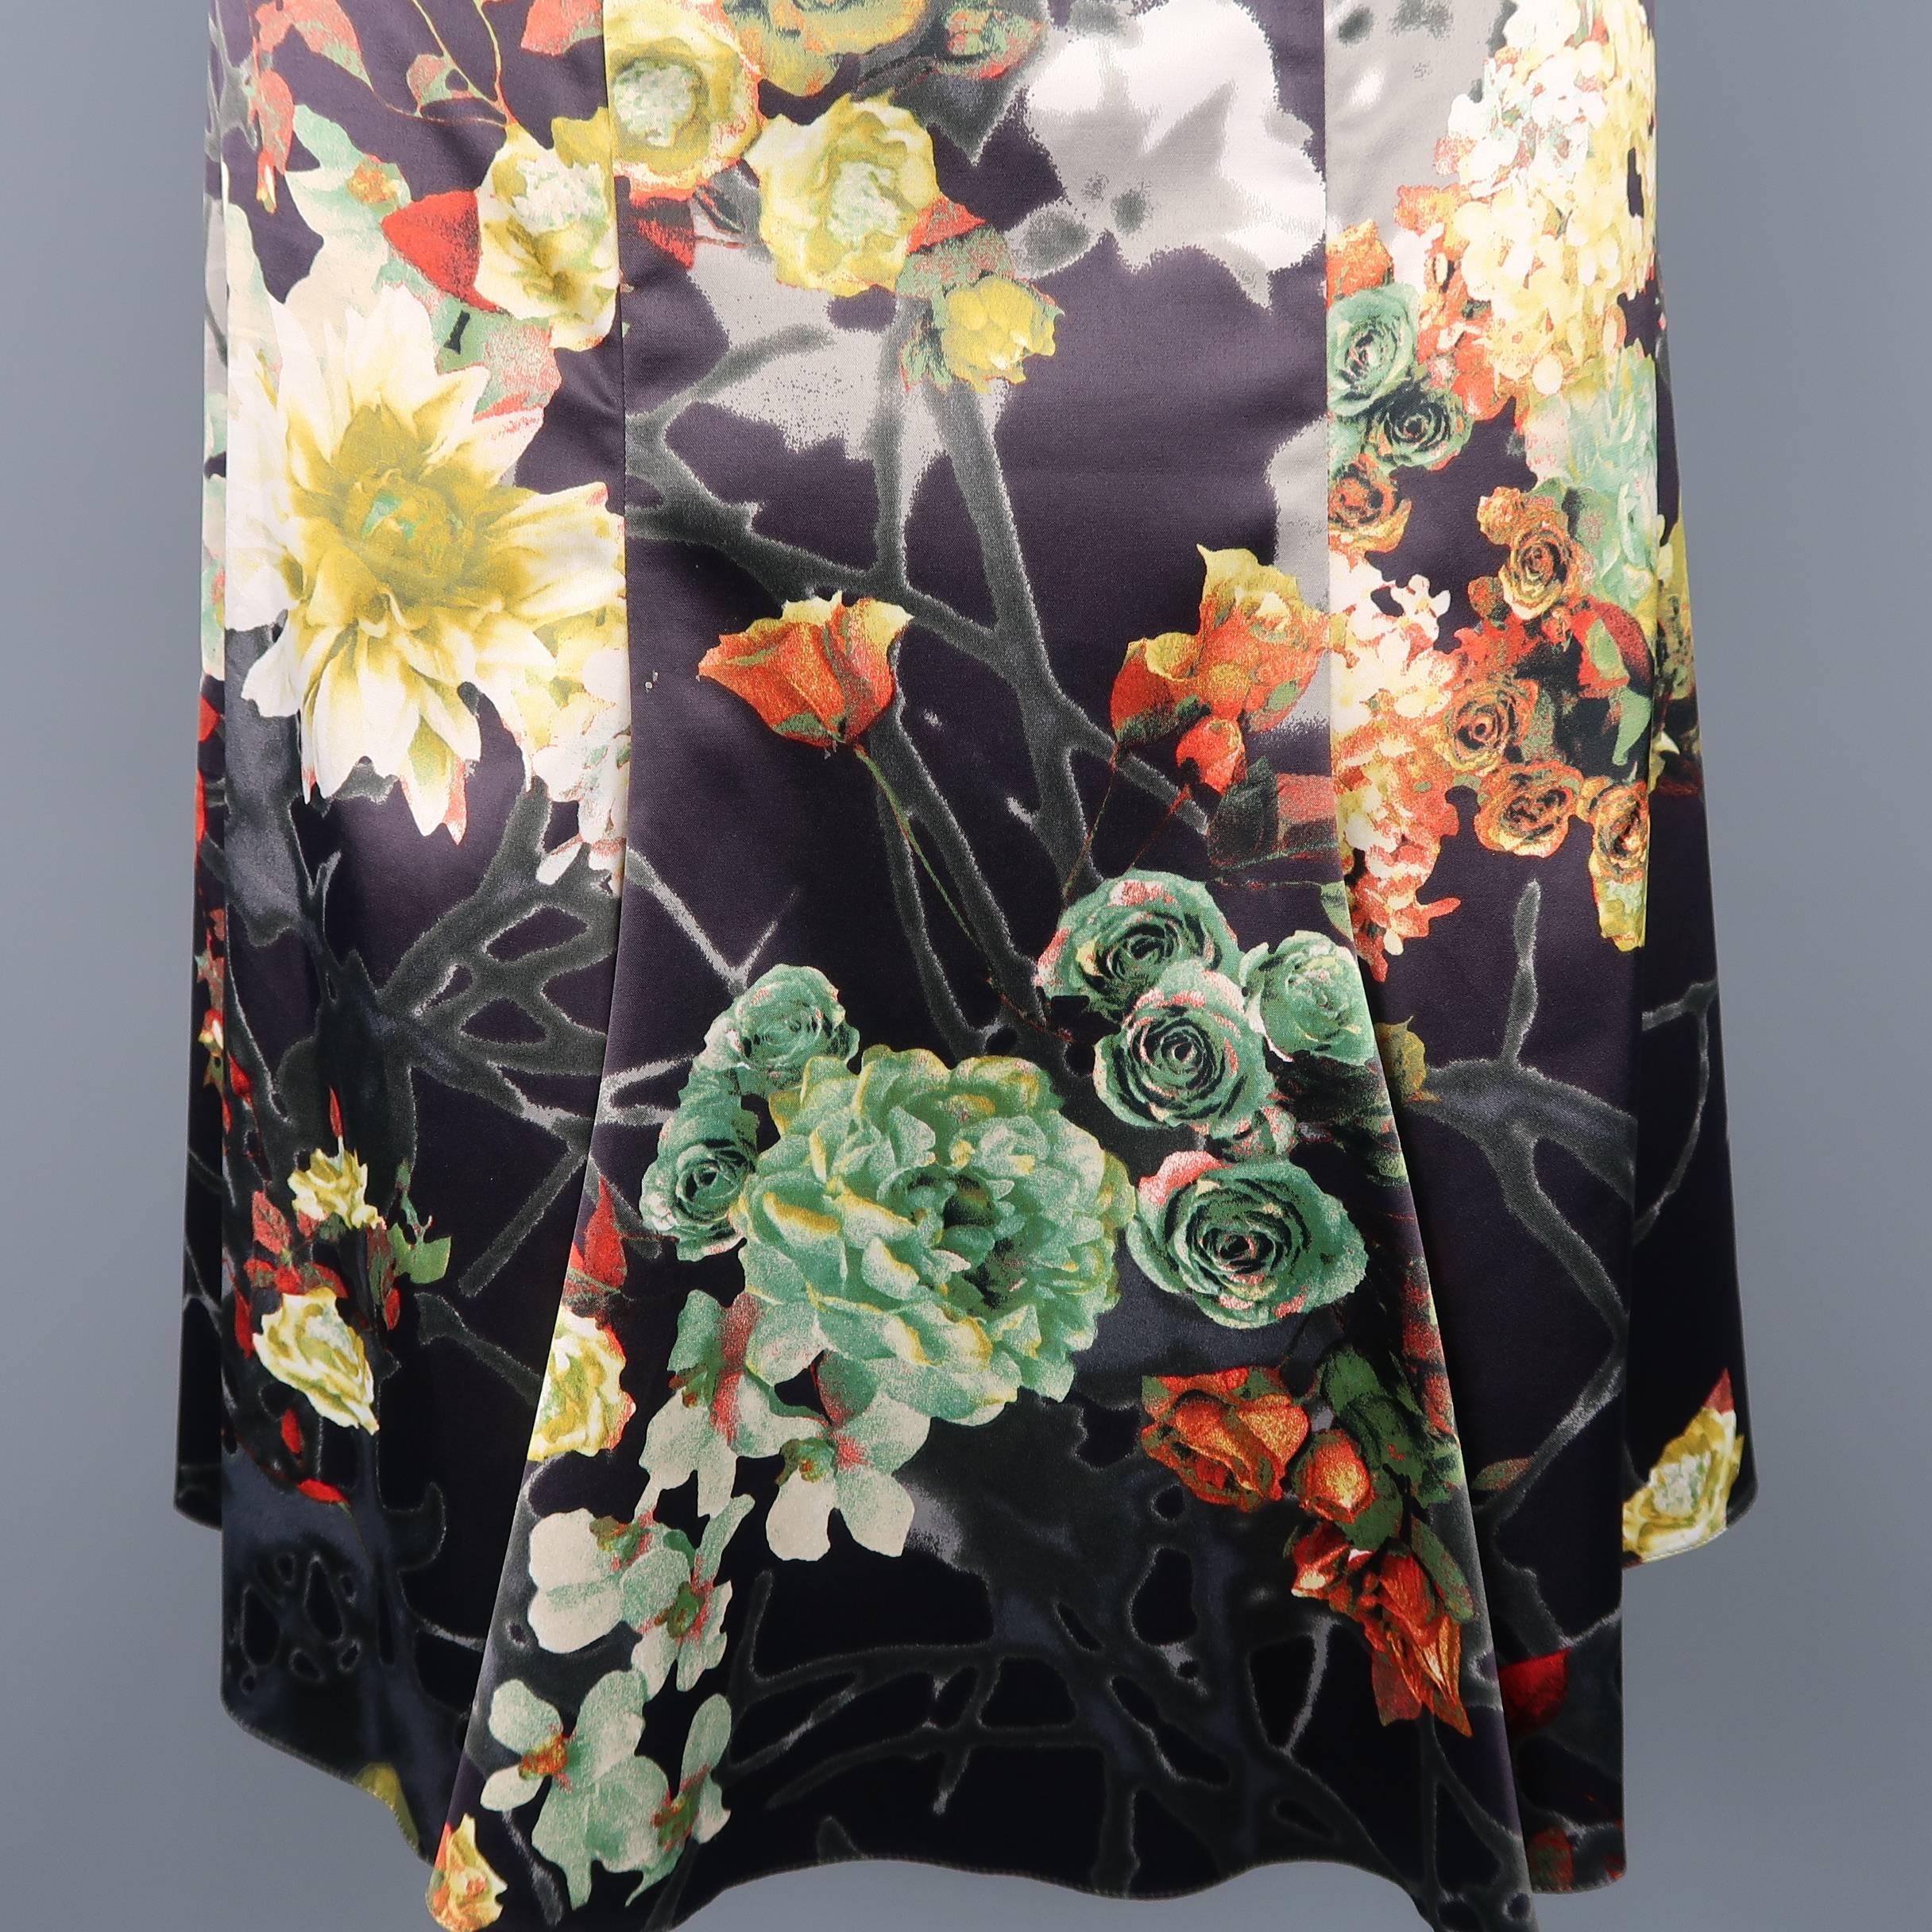 JUST CAVALLI flare skirt comes in a charcoal abstract floral print satin twill material with hues of chartreuse, mint green,  and orange red with a ruffled hemline. Tags removed. As-is. Made in Italy.
 
Good Pre-Owned Condition.
Marked: (no tag)
